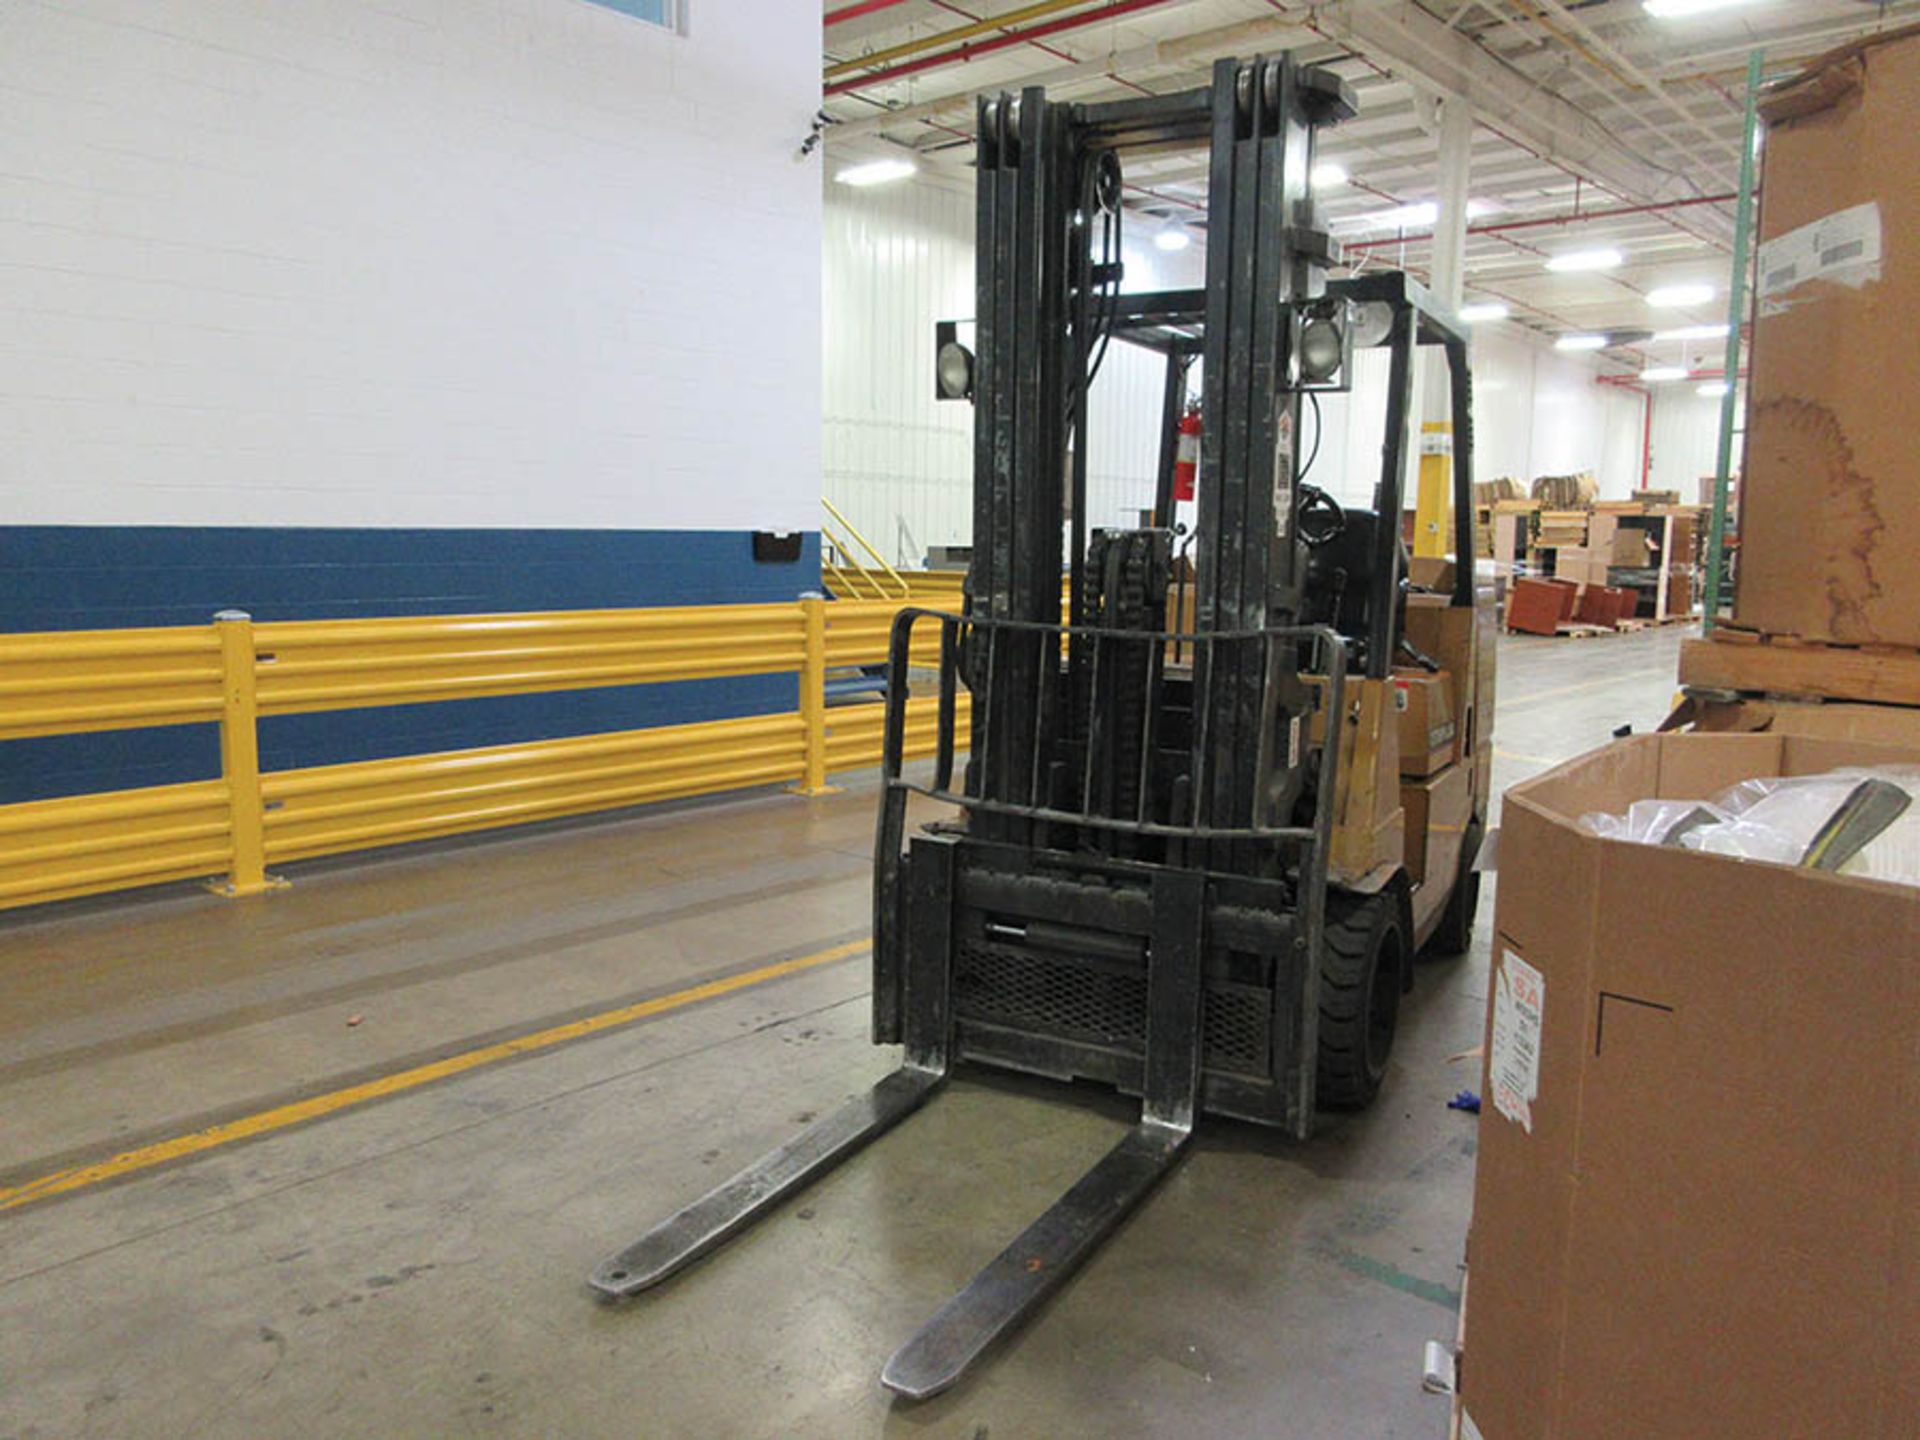 CATERPILLAR 10,000-LB. CAP. LPG FORKLIFT, 3-STAGE MAST, SIDE SHIFT, 209'' MAX LOAD HEIGHT, LEVER - Image 5 of 6